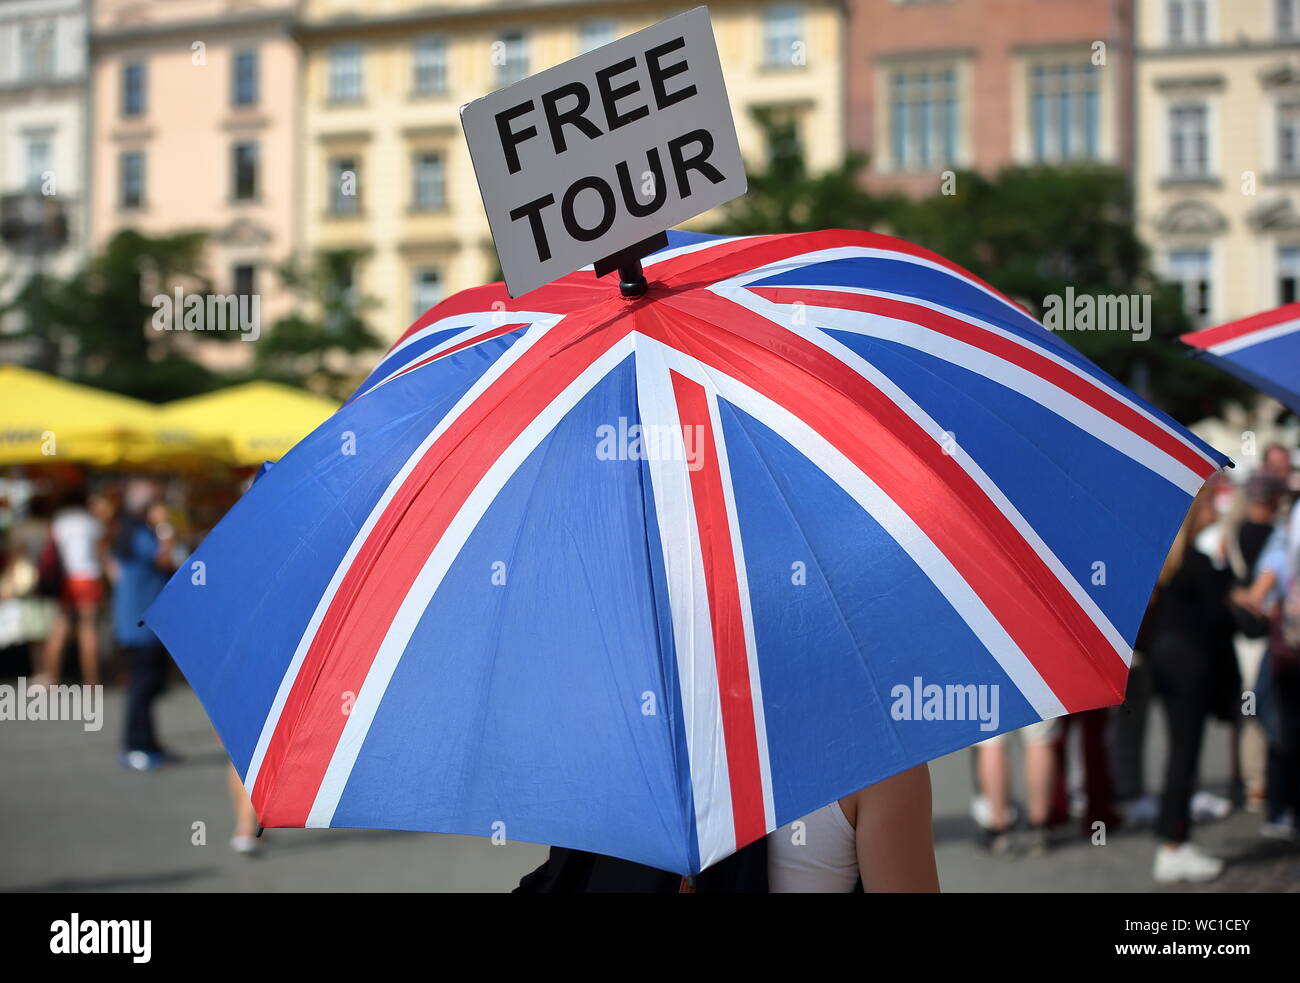 Umbrella with national colours of Union Jack  / Union flag with information on board at the top free tour, CLOSE UP, in city center Stock Photo